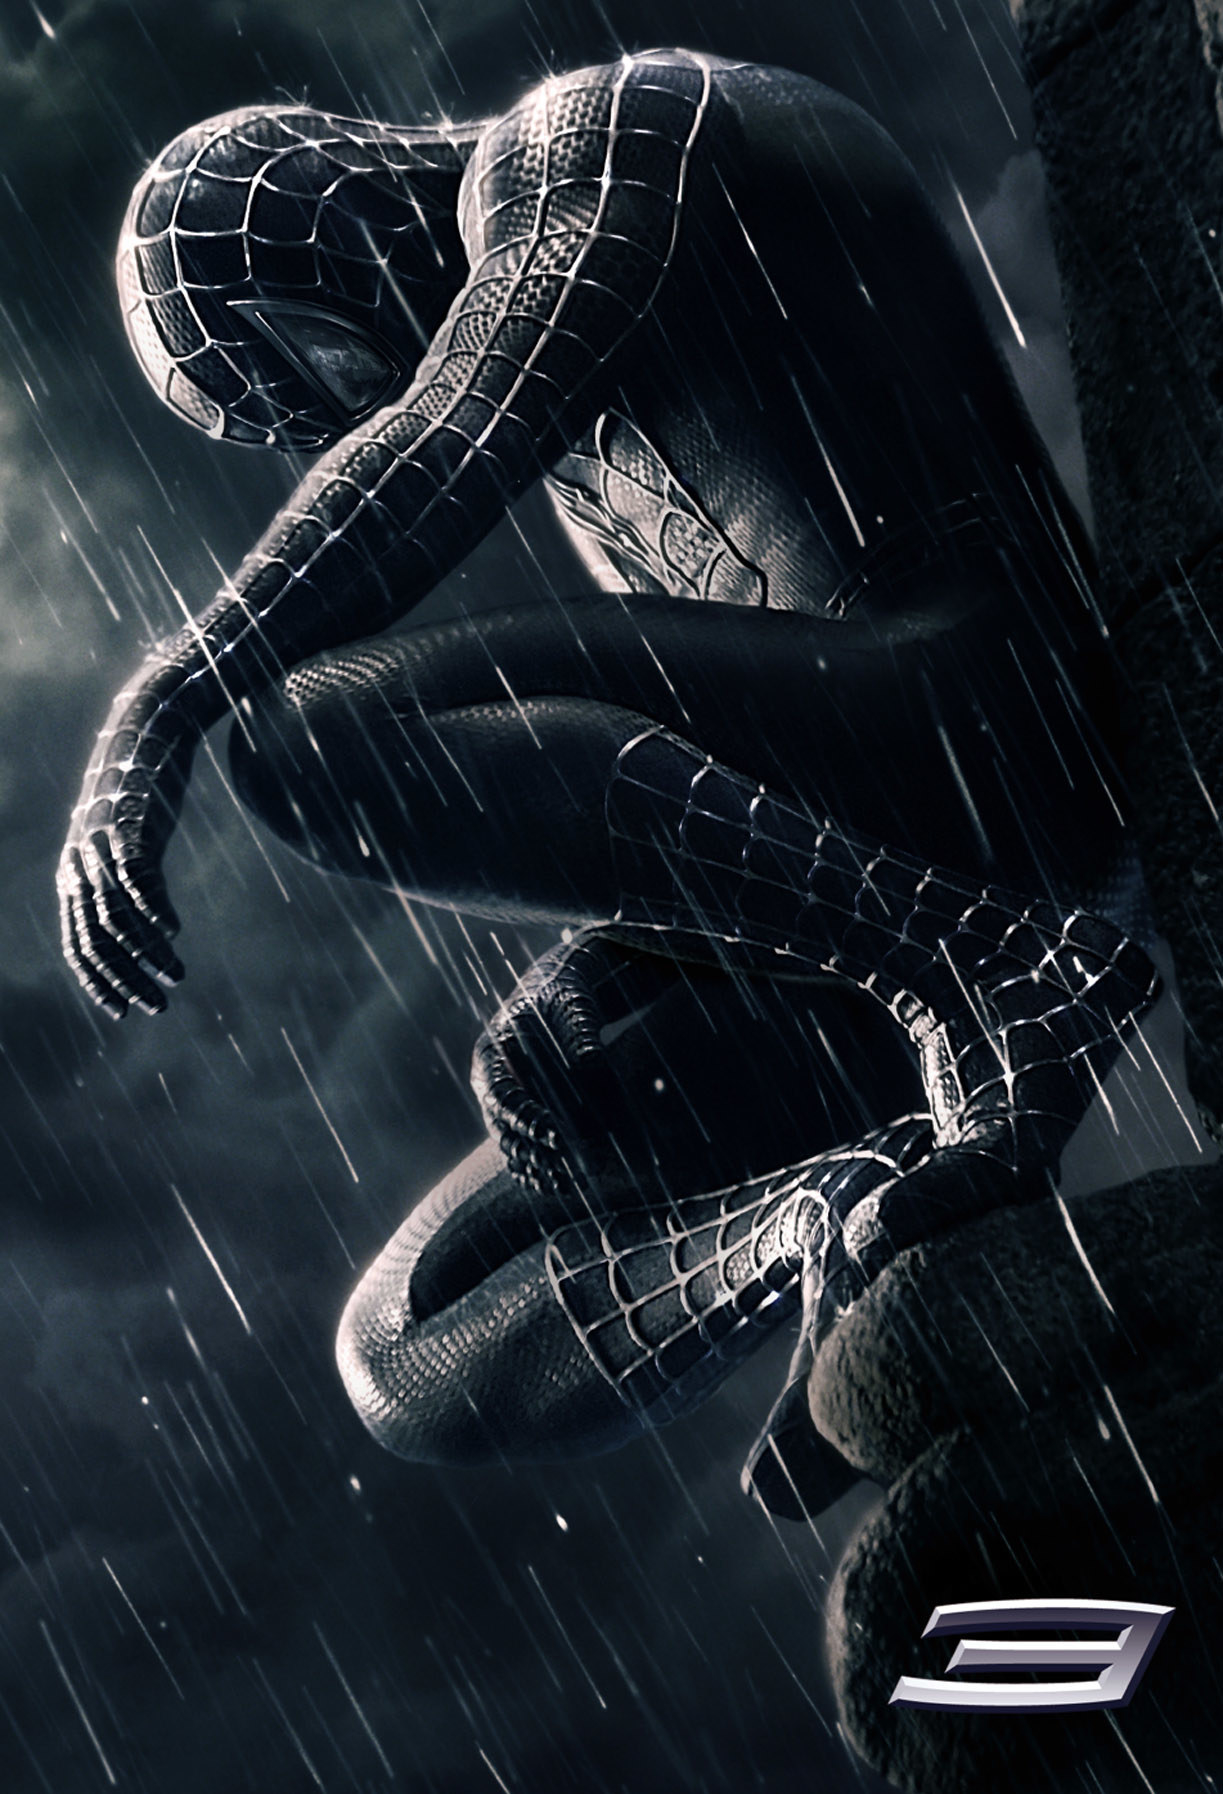 Spider-Man 3 poster, with Spidey in the black suit